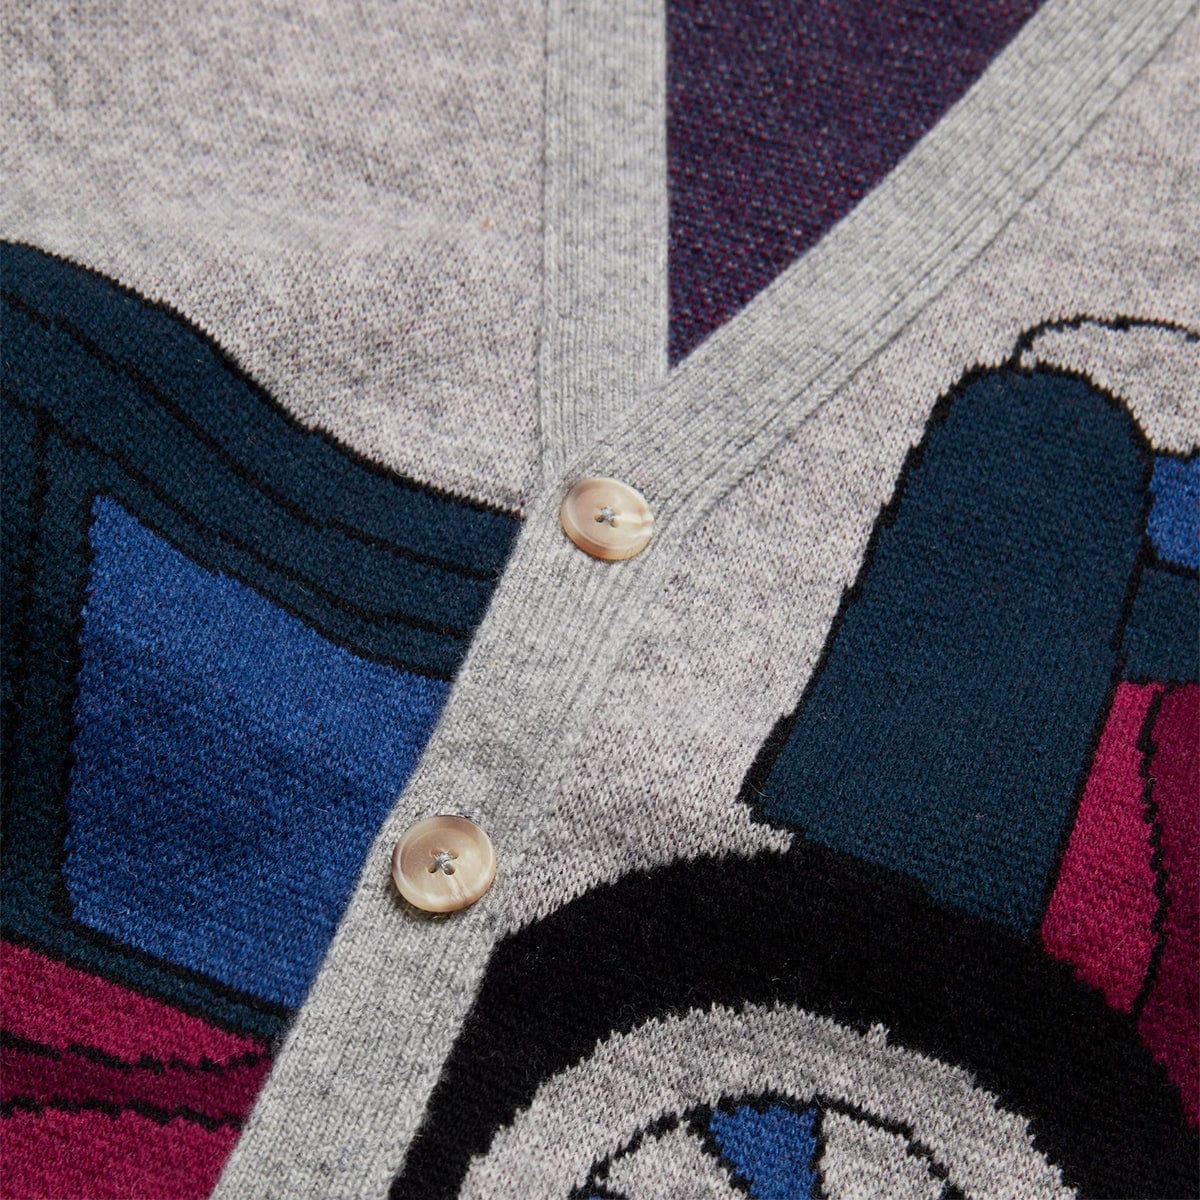 By Parra Knitwear NO PARKING KNITTED CARDIGAN